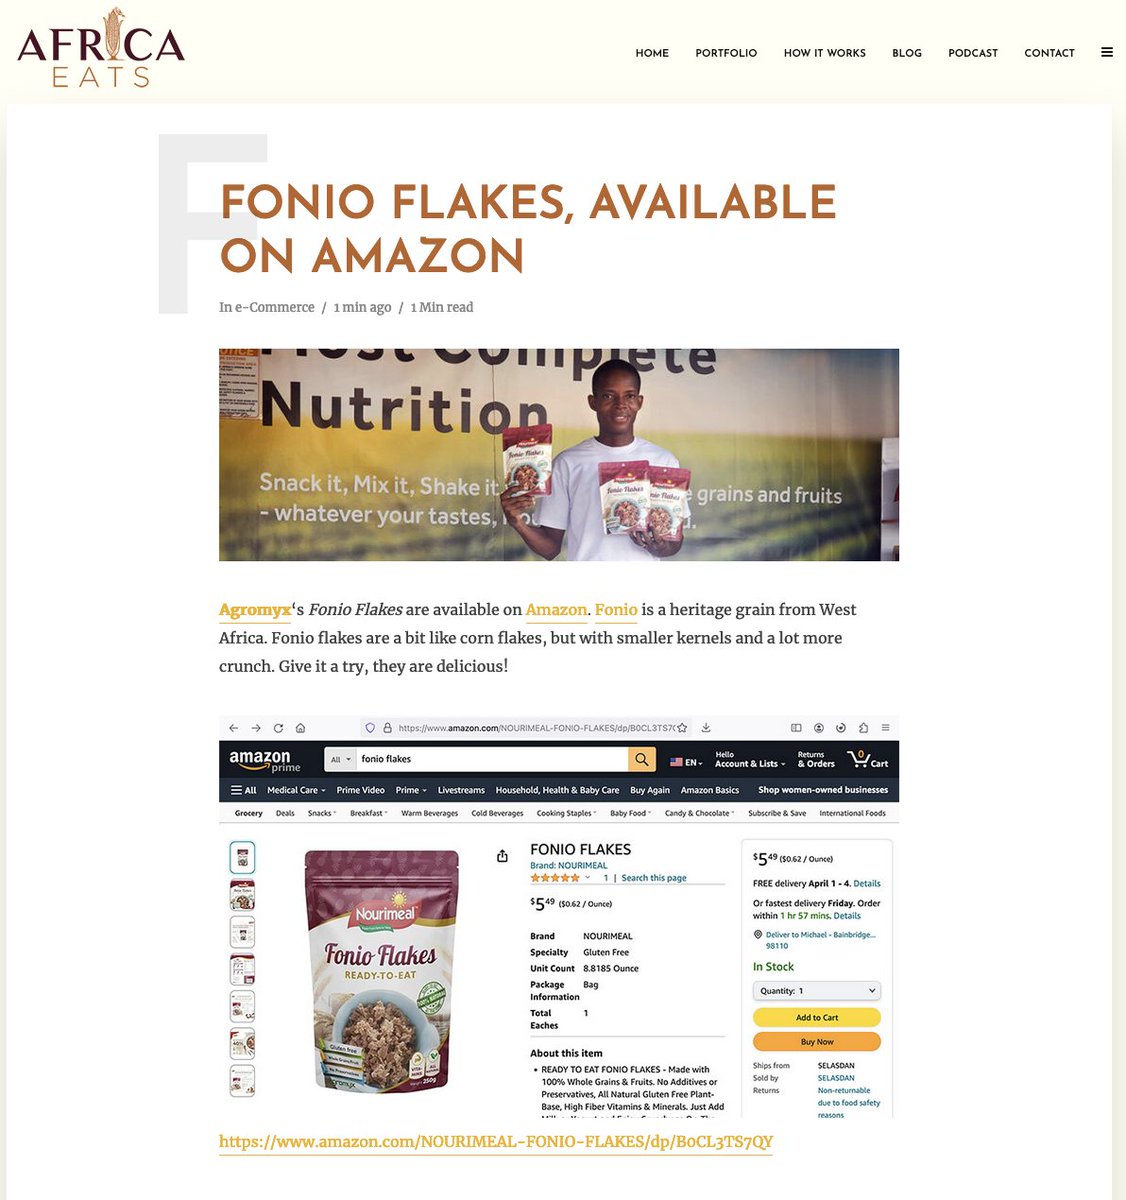 Fonio Flakes from Agromyx in Ghana are now available on Amazon. africaeats.com/fonio-flakes-a…